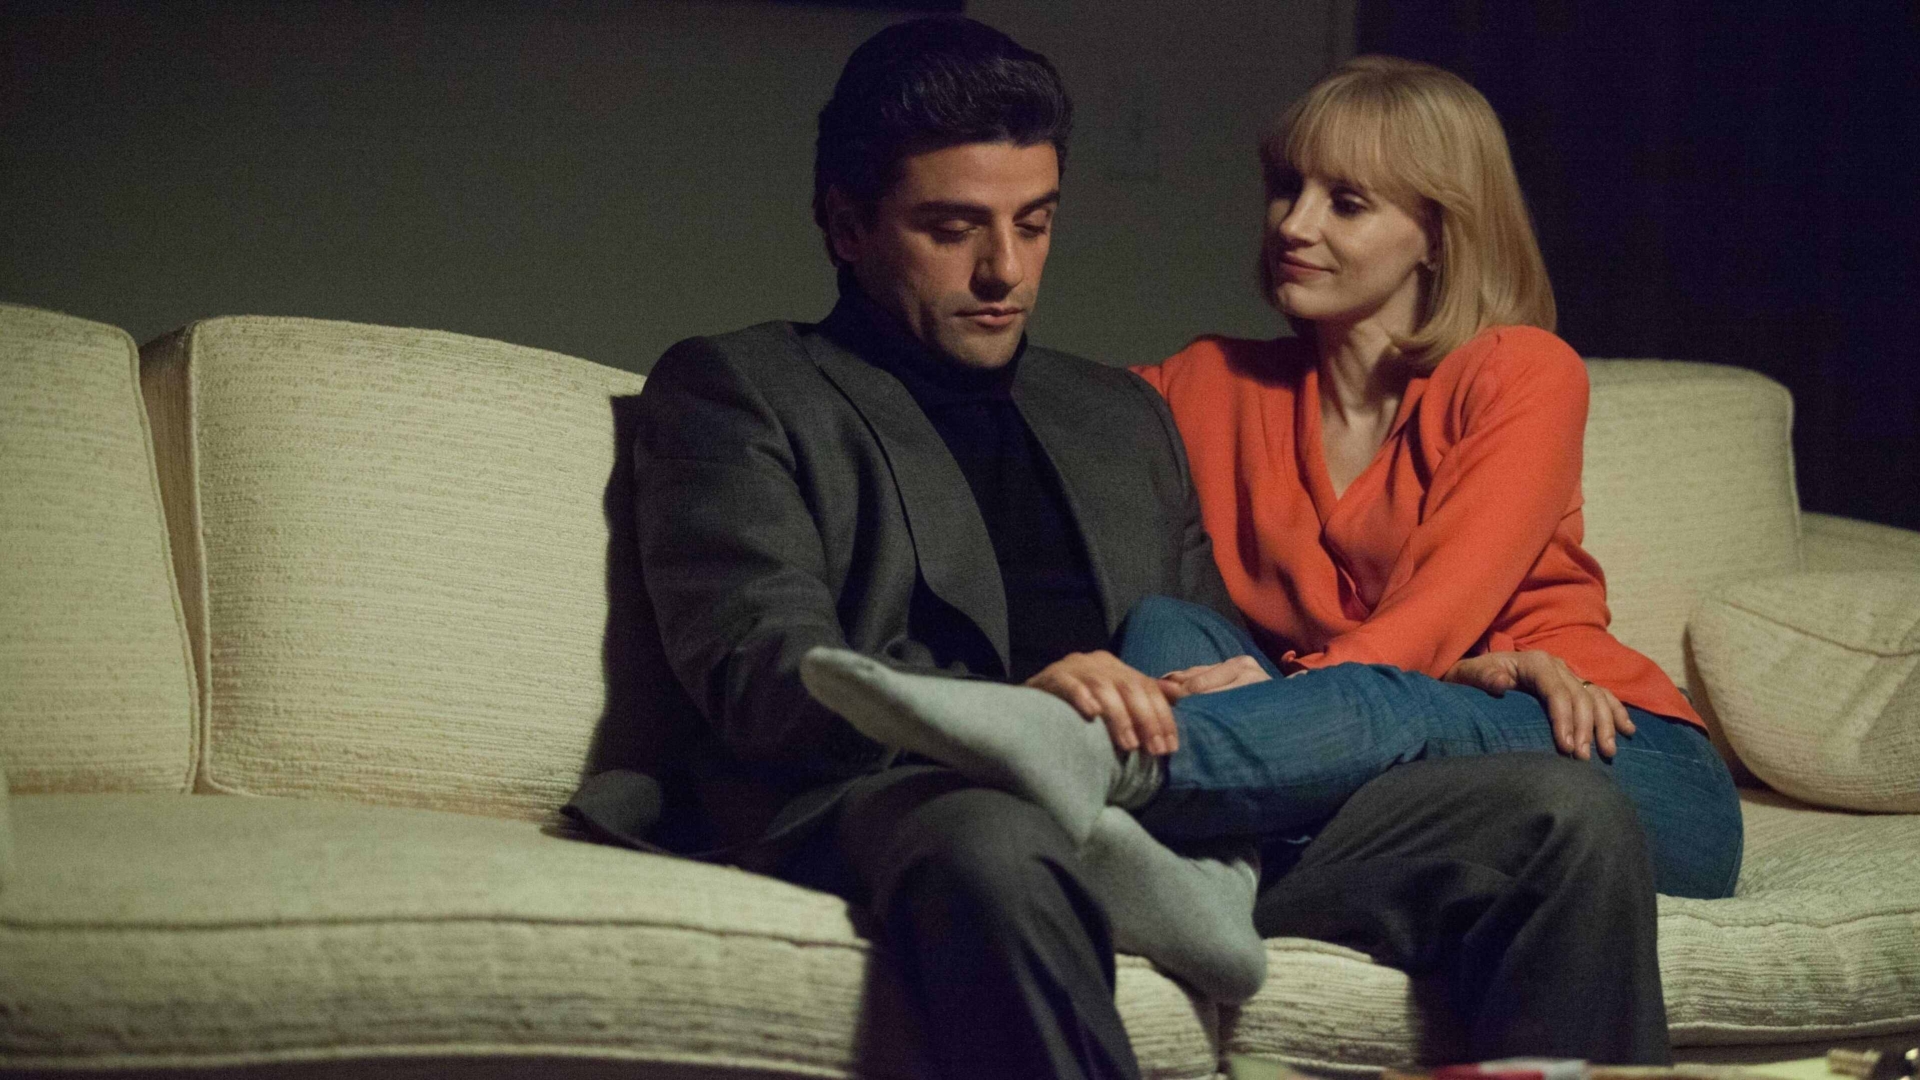 A Most Violent Year (A Most Violent Year)